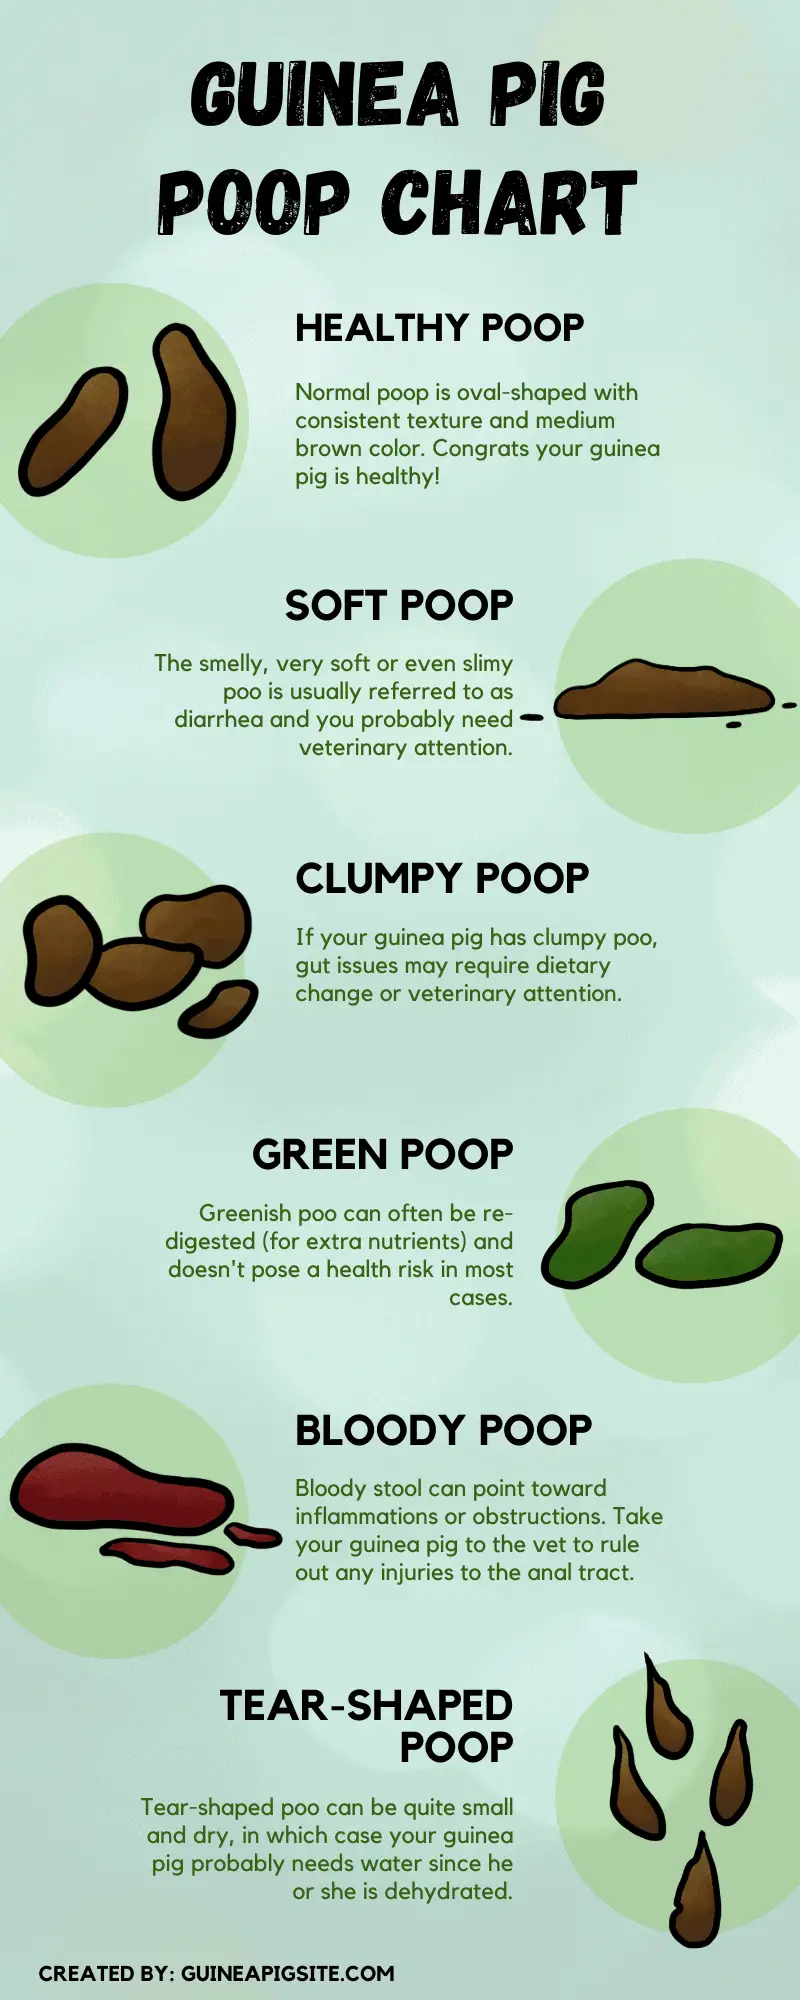 Guinea Pig Poop Chart - Everything You Need To Know - Guinea Pig Site